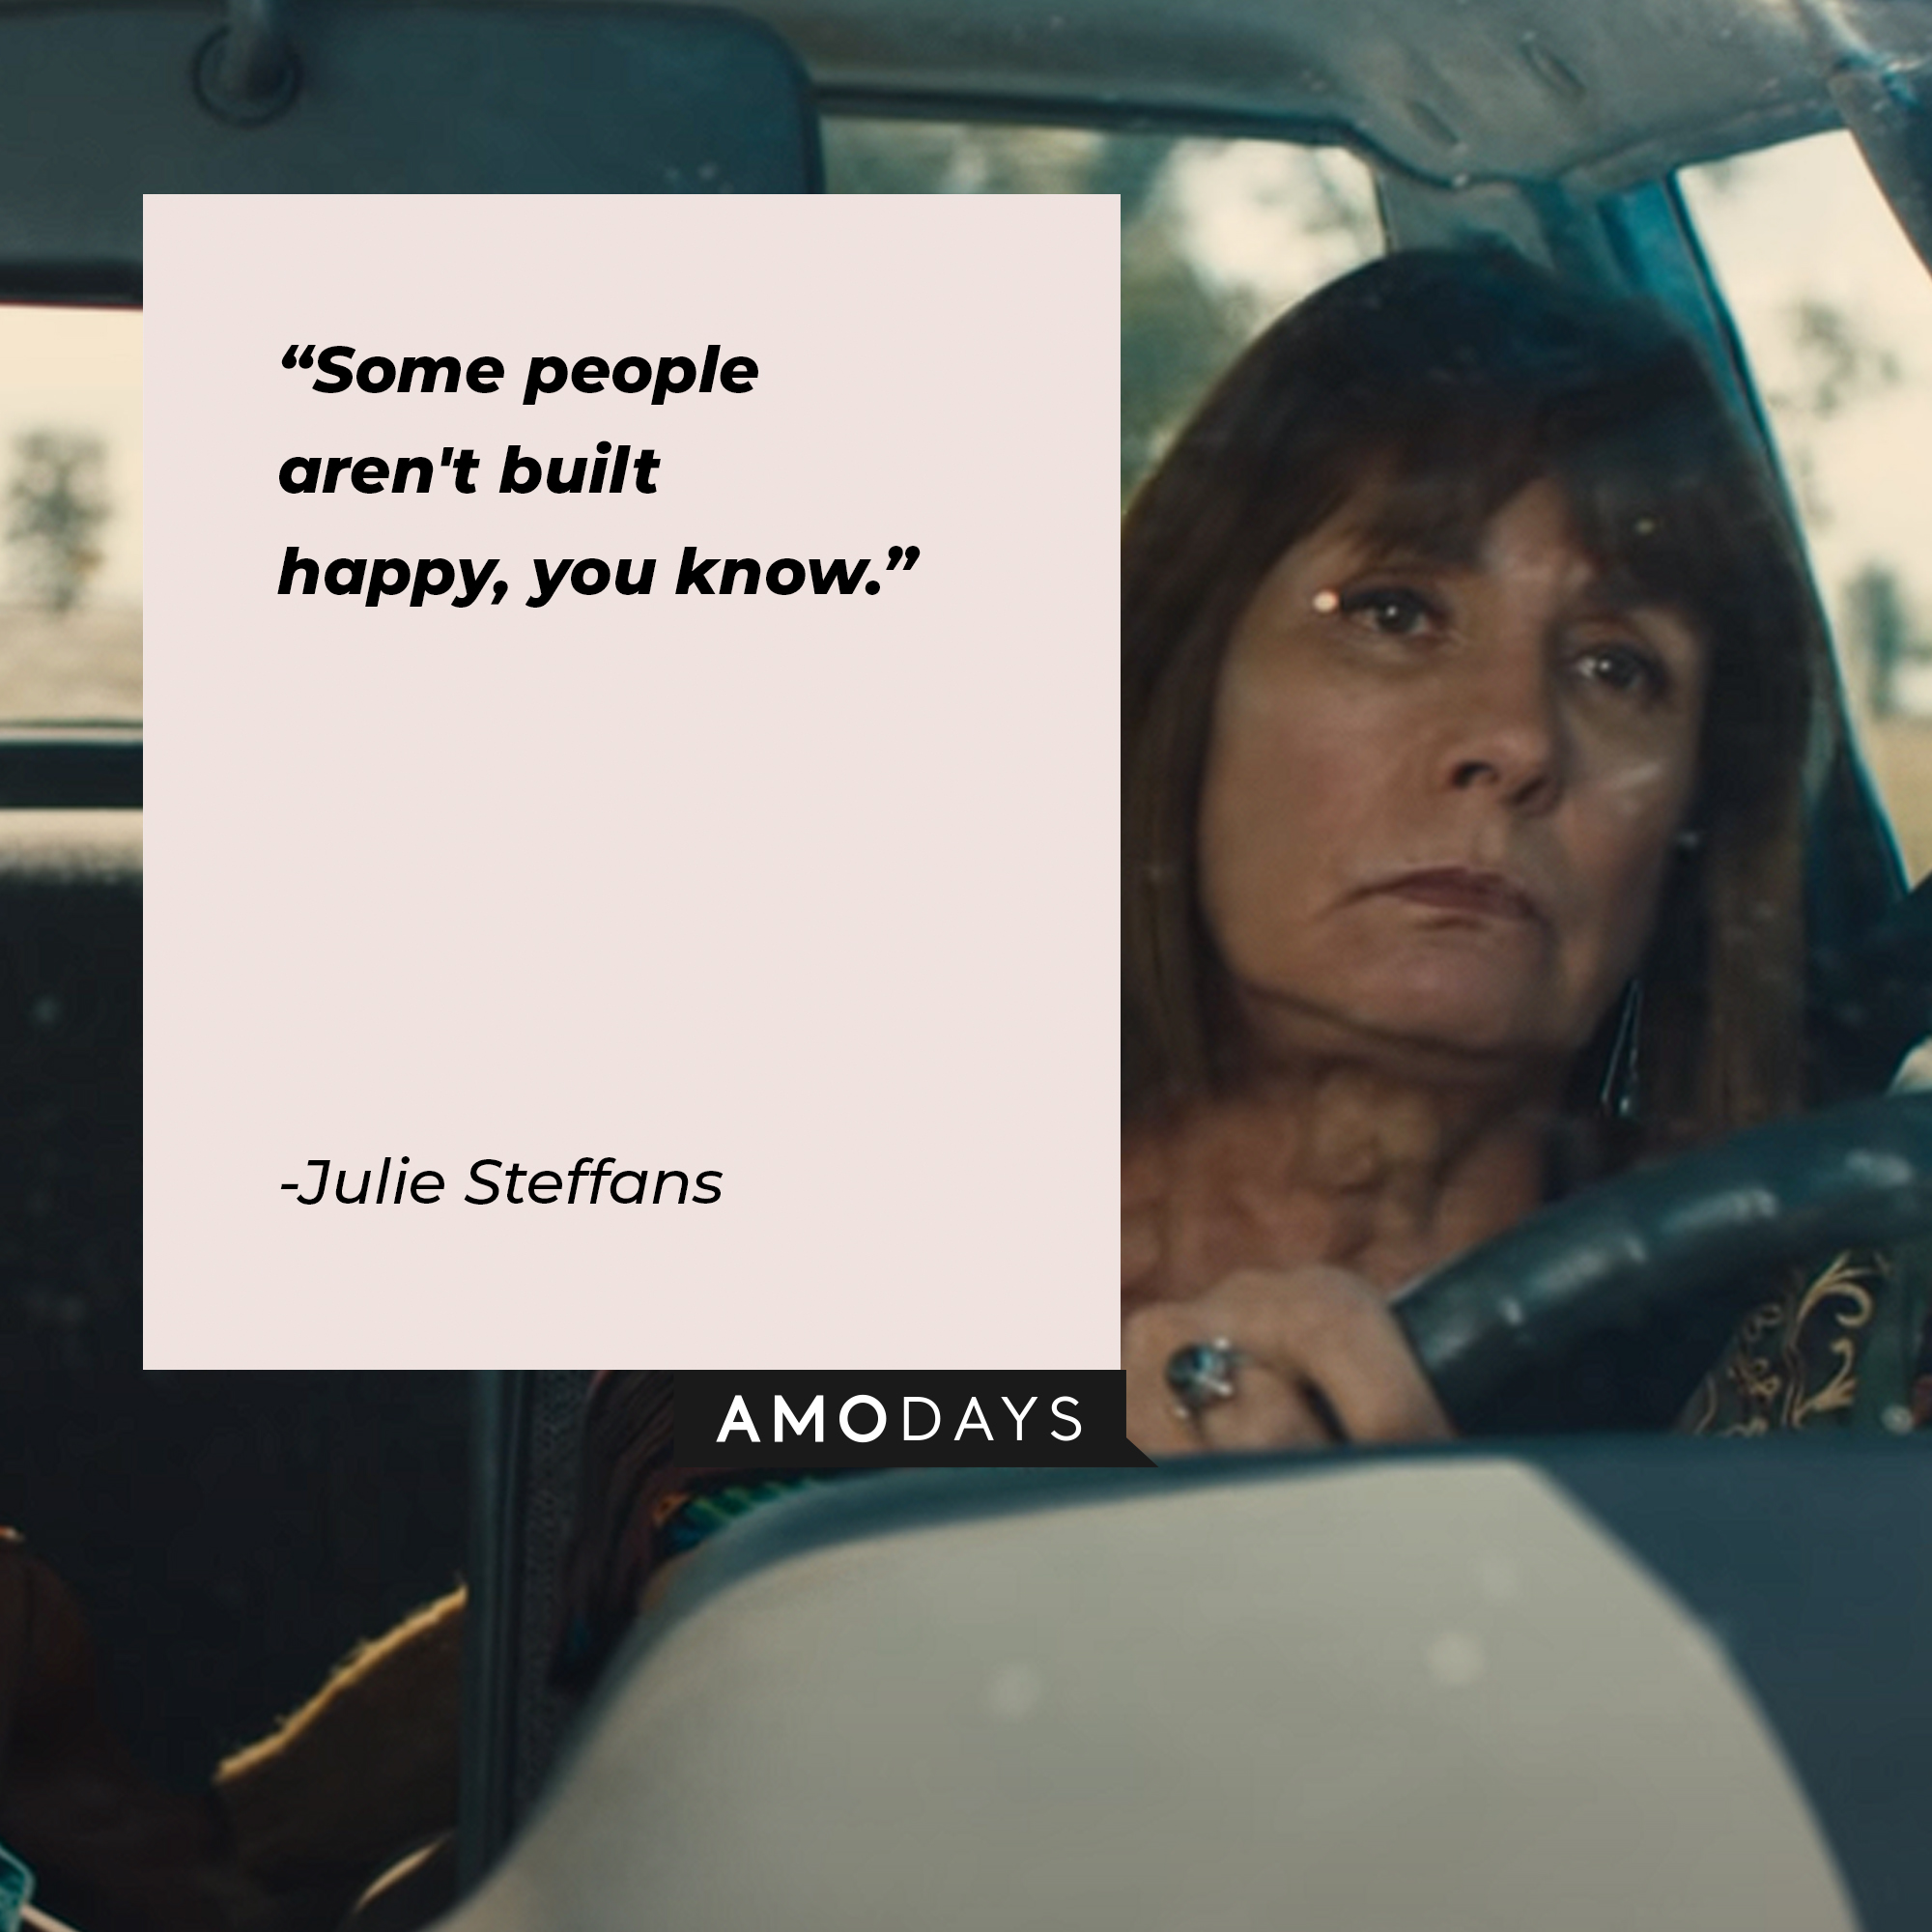 Julie Steffans' quote: "Some people aren't built happy, you know." | Source: youtube.com/A24